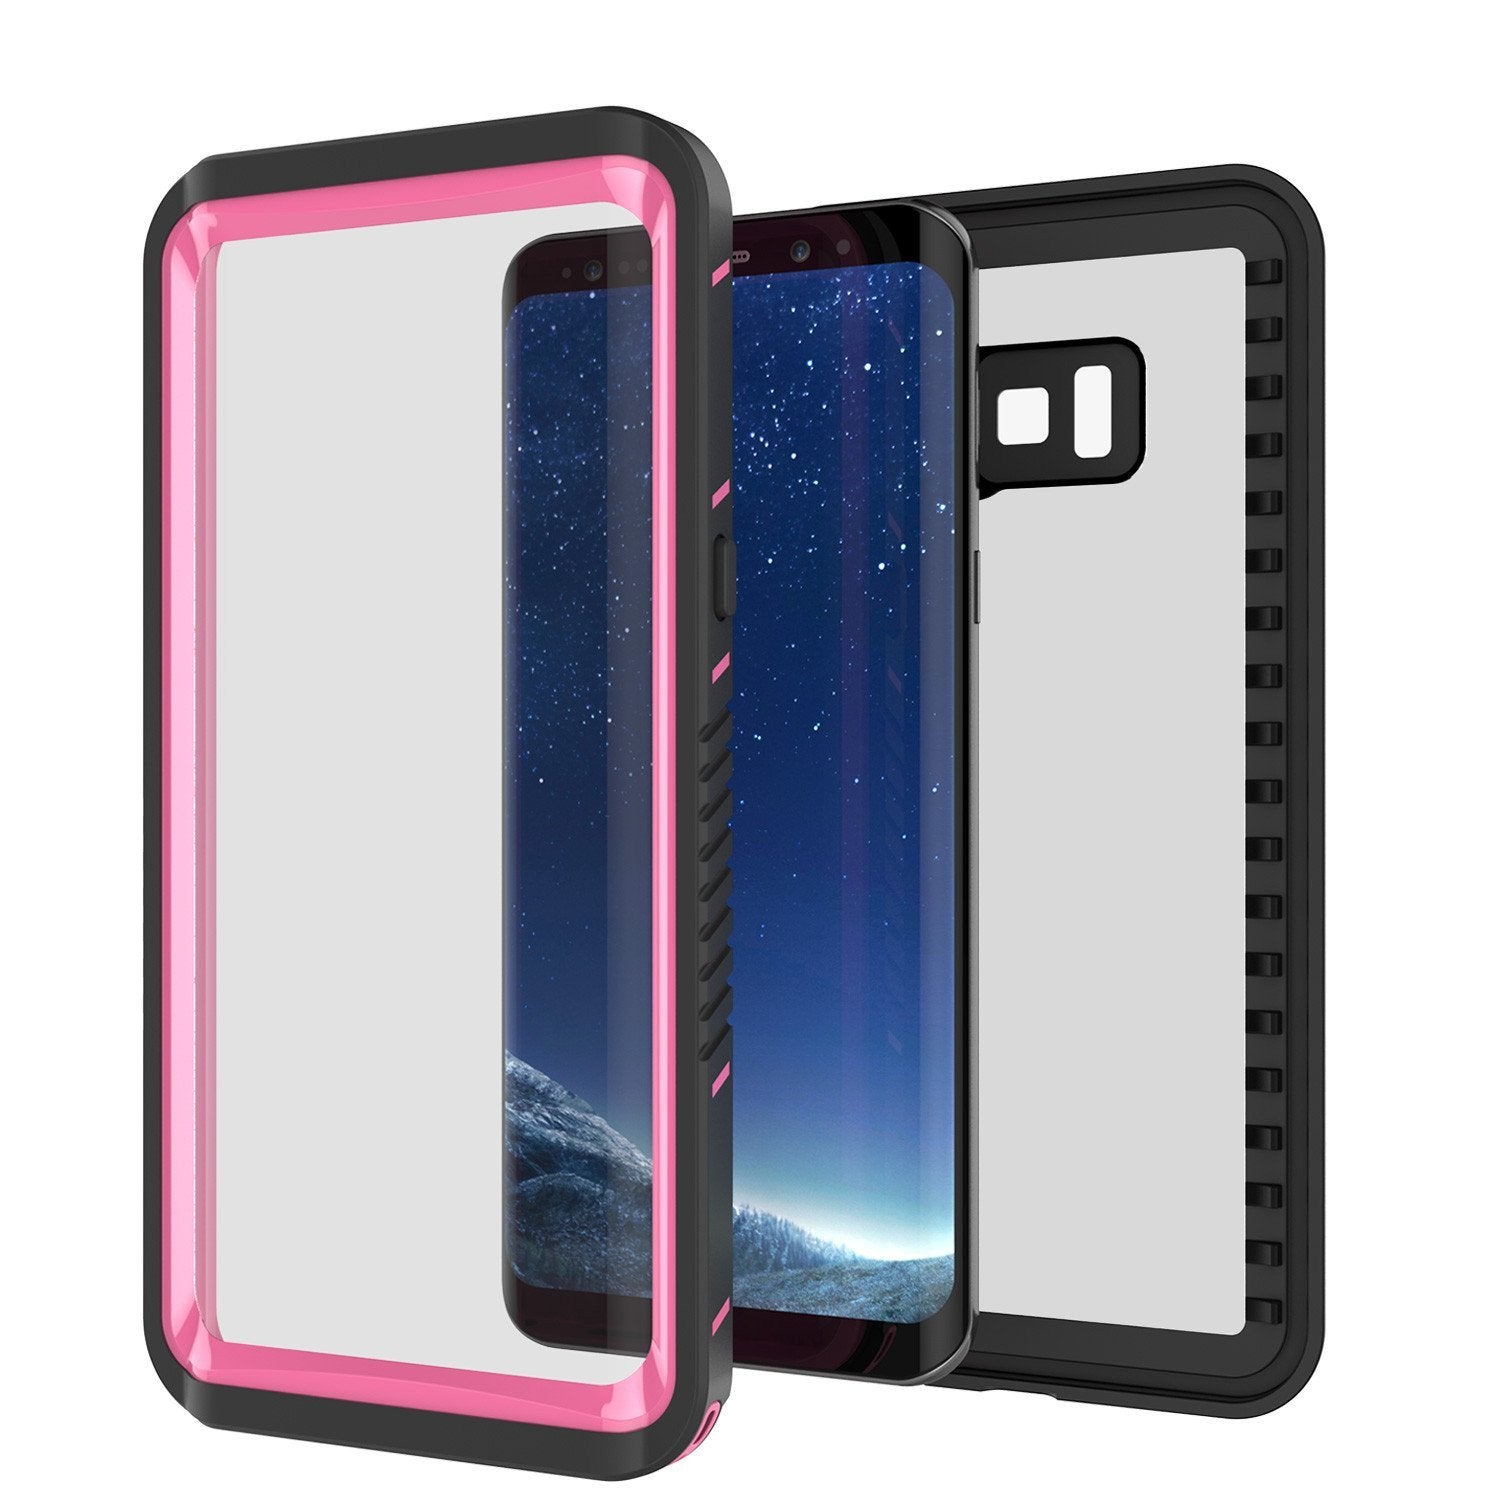 Galaxy S8 PLUS Waterproof Case, Punkcase [Extreme Series] [Slim Fit] [IP68 Certified] [Shockproof] [Snowproof] [Dirproof] Armor Cover W/ Built In Screen Protector for Samsung Galaxy S8+ [Pink] - PunkCase NZ